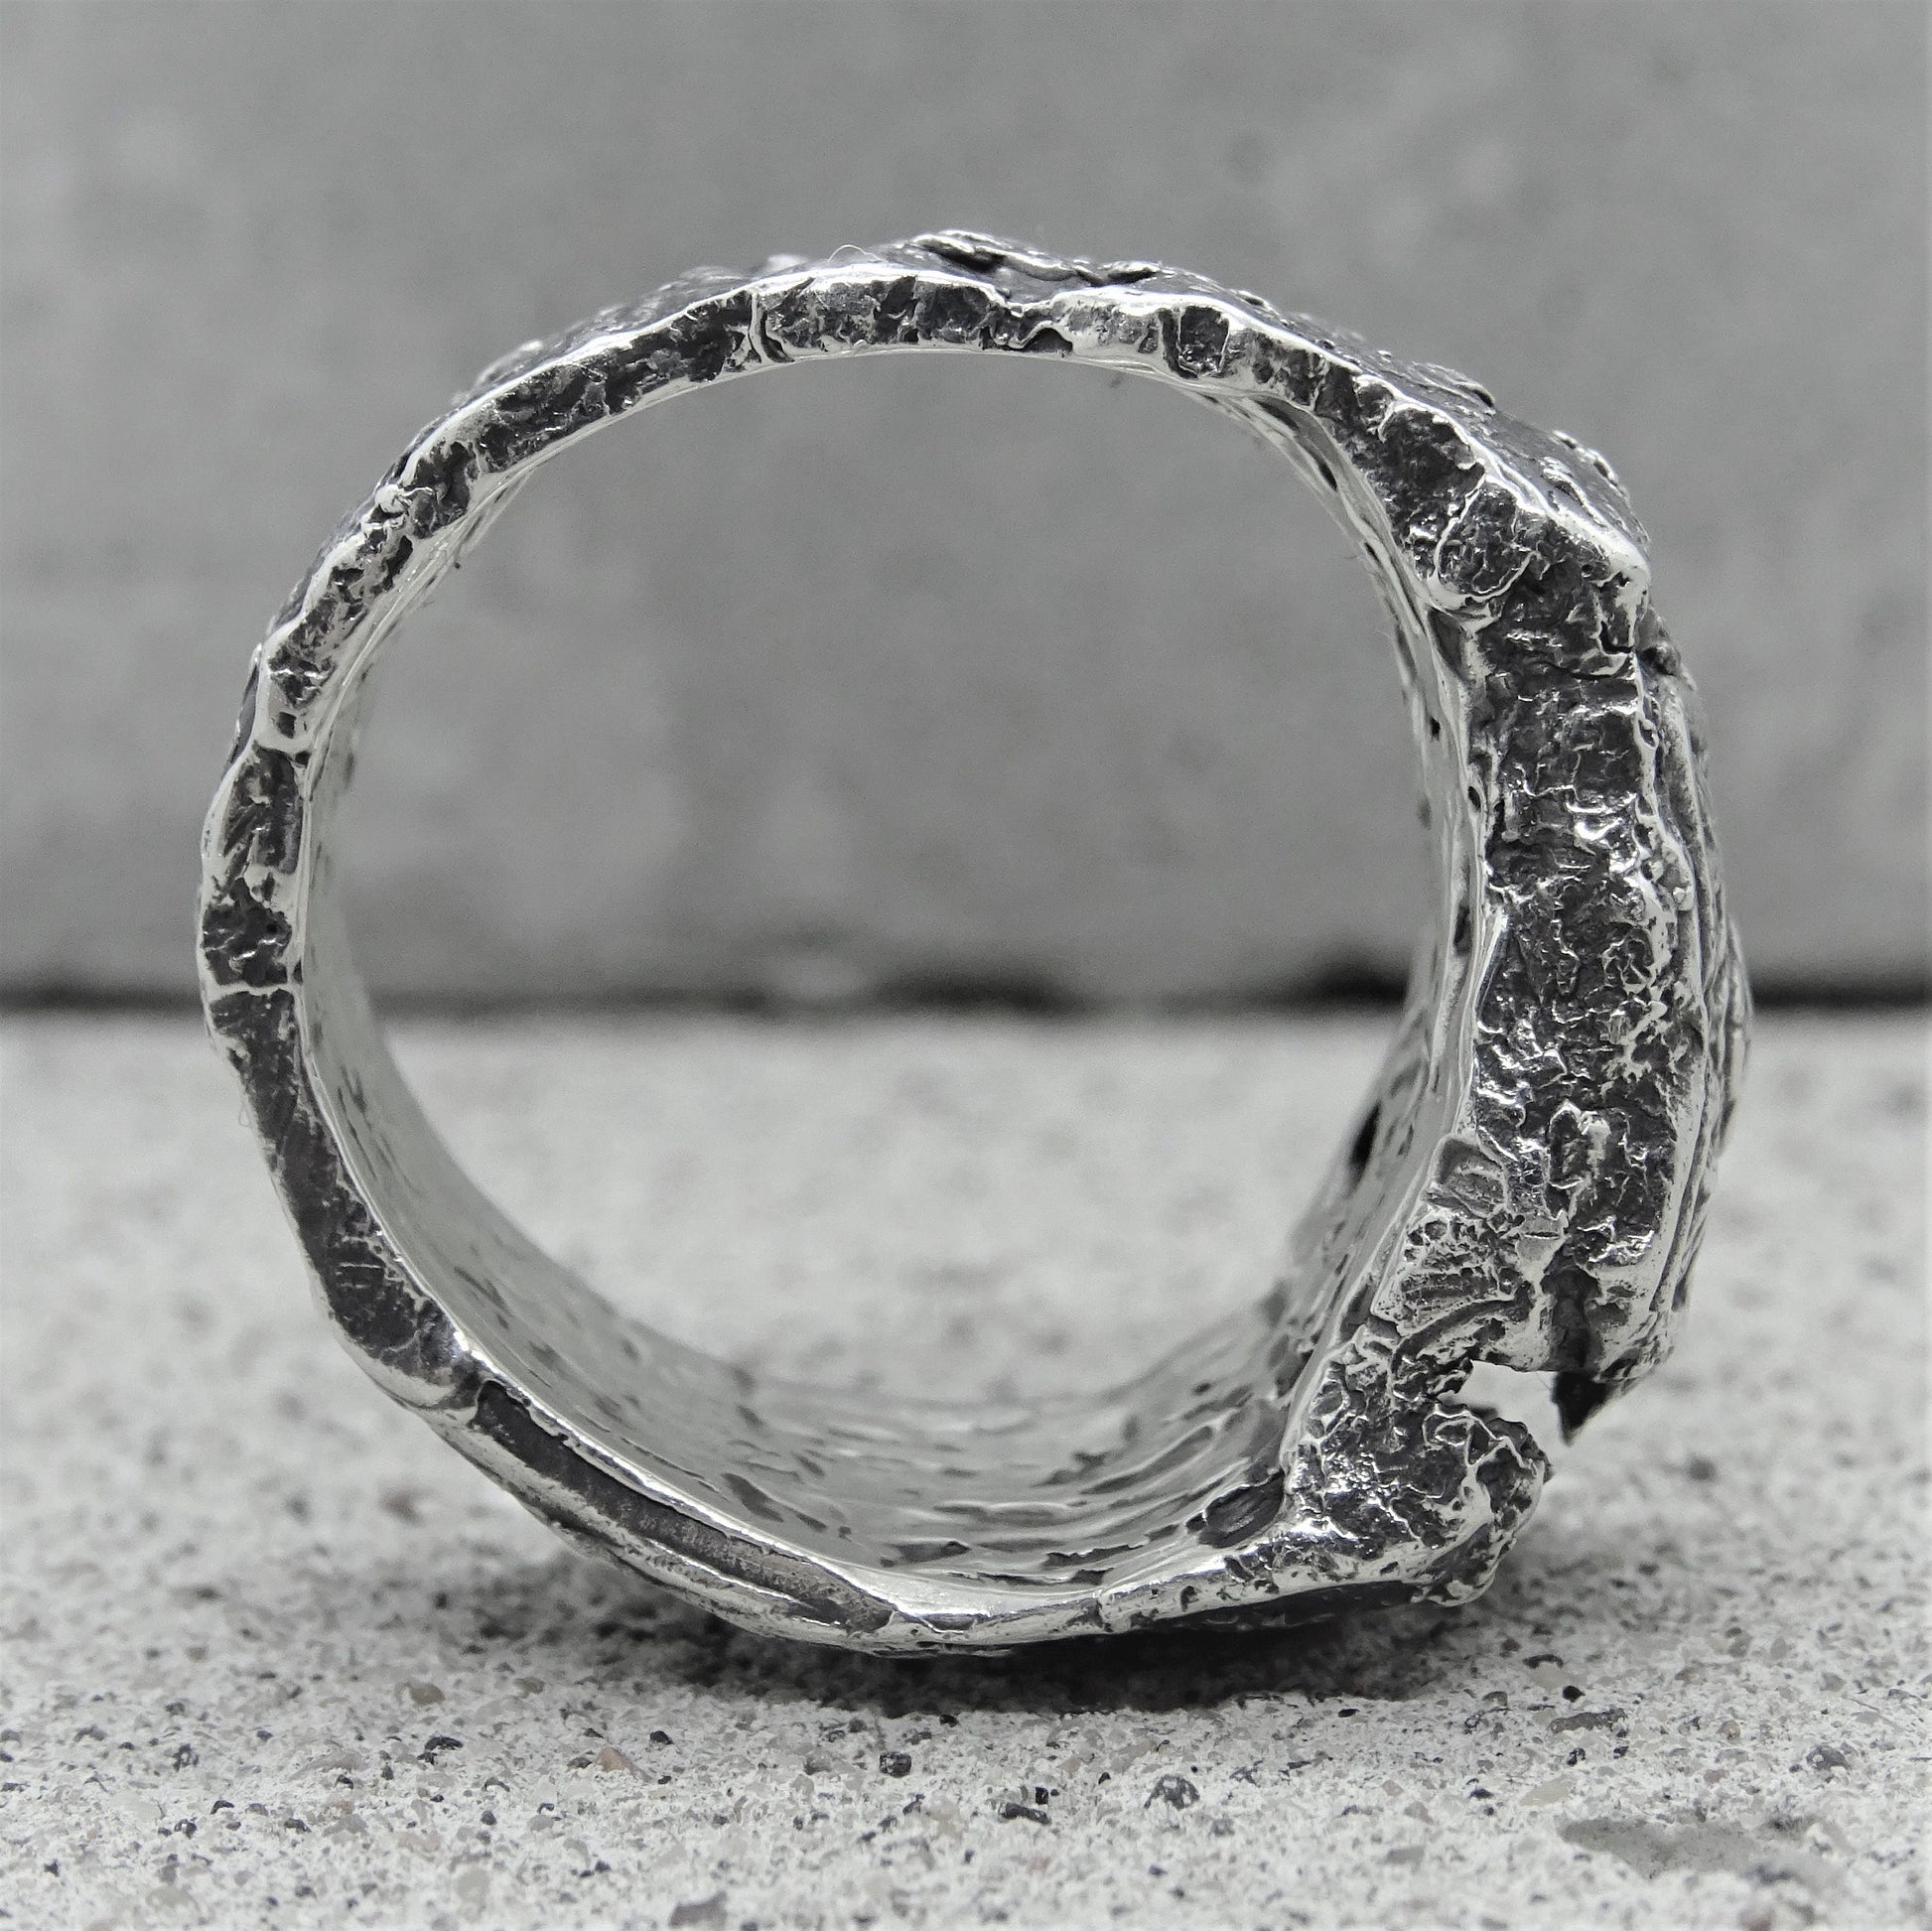 Eastern ring- unusual textures ring with cracks and oriental pattern Rings with cracks and patterns Project50g 